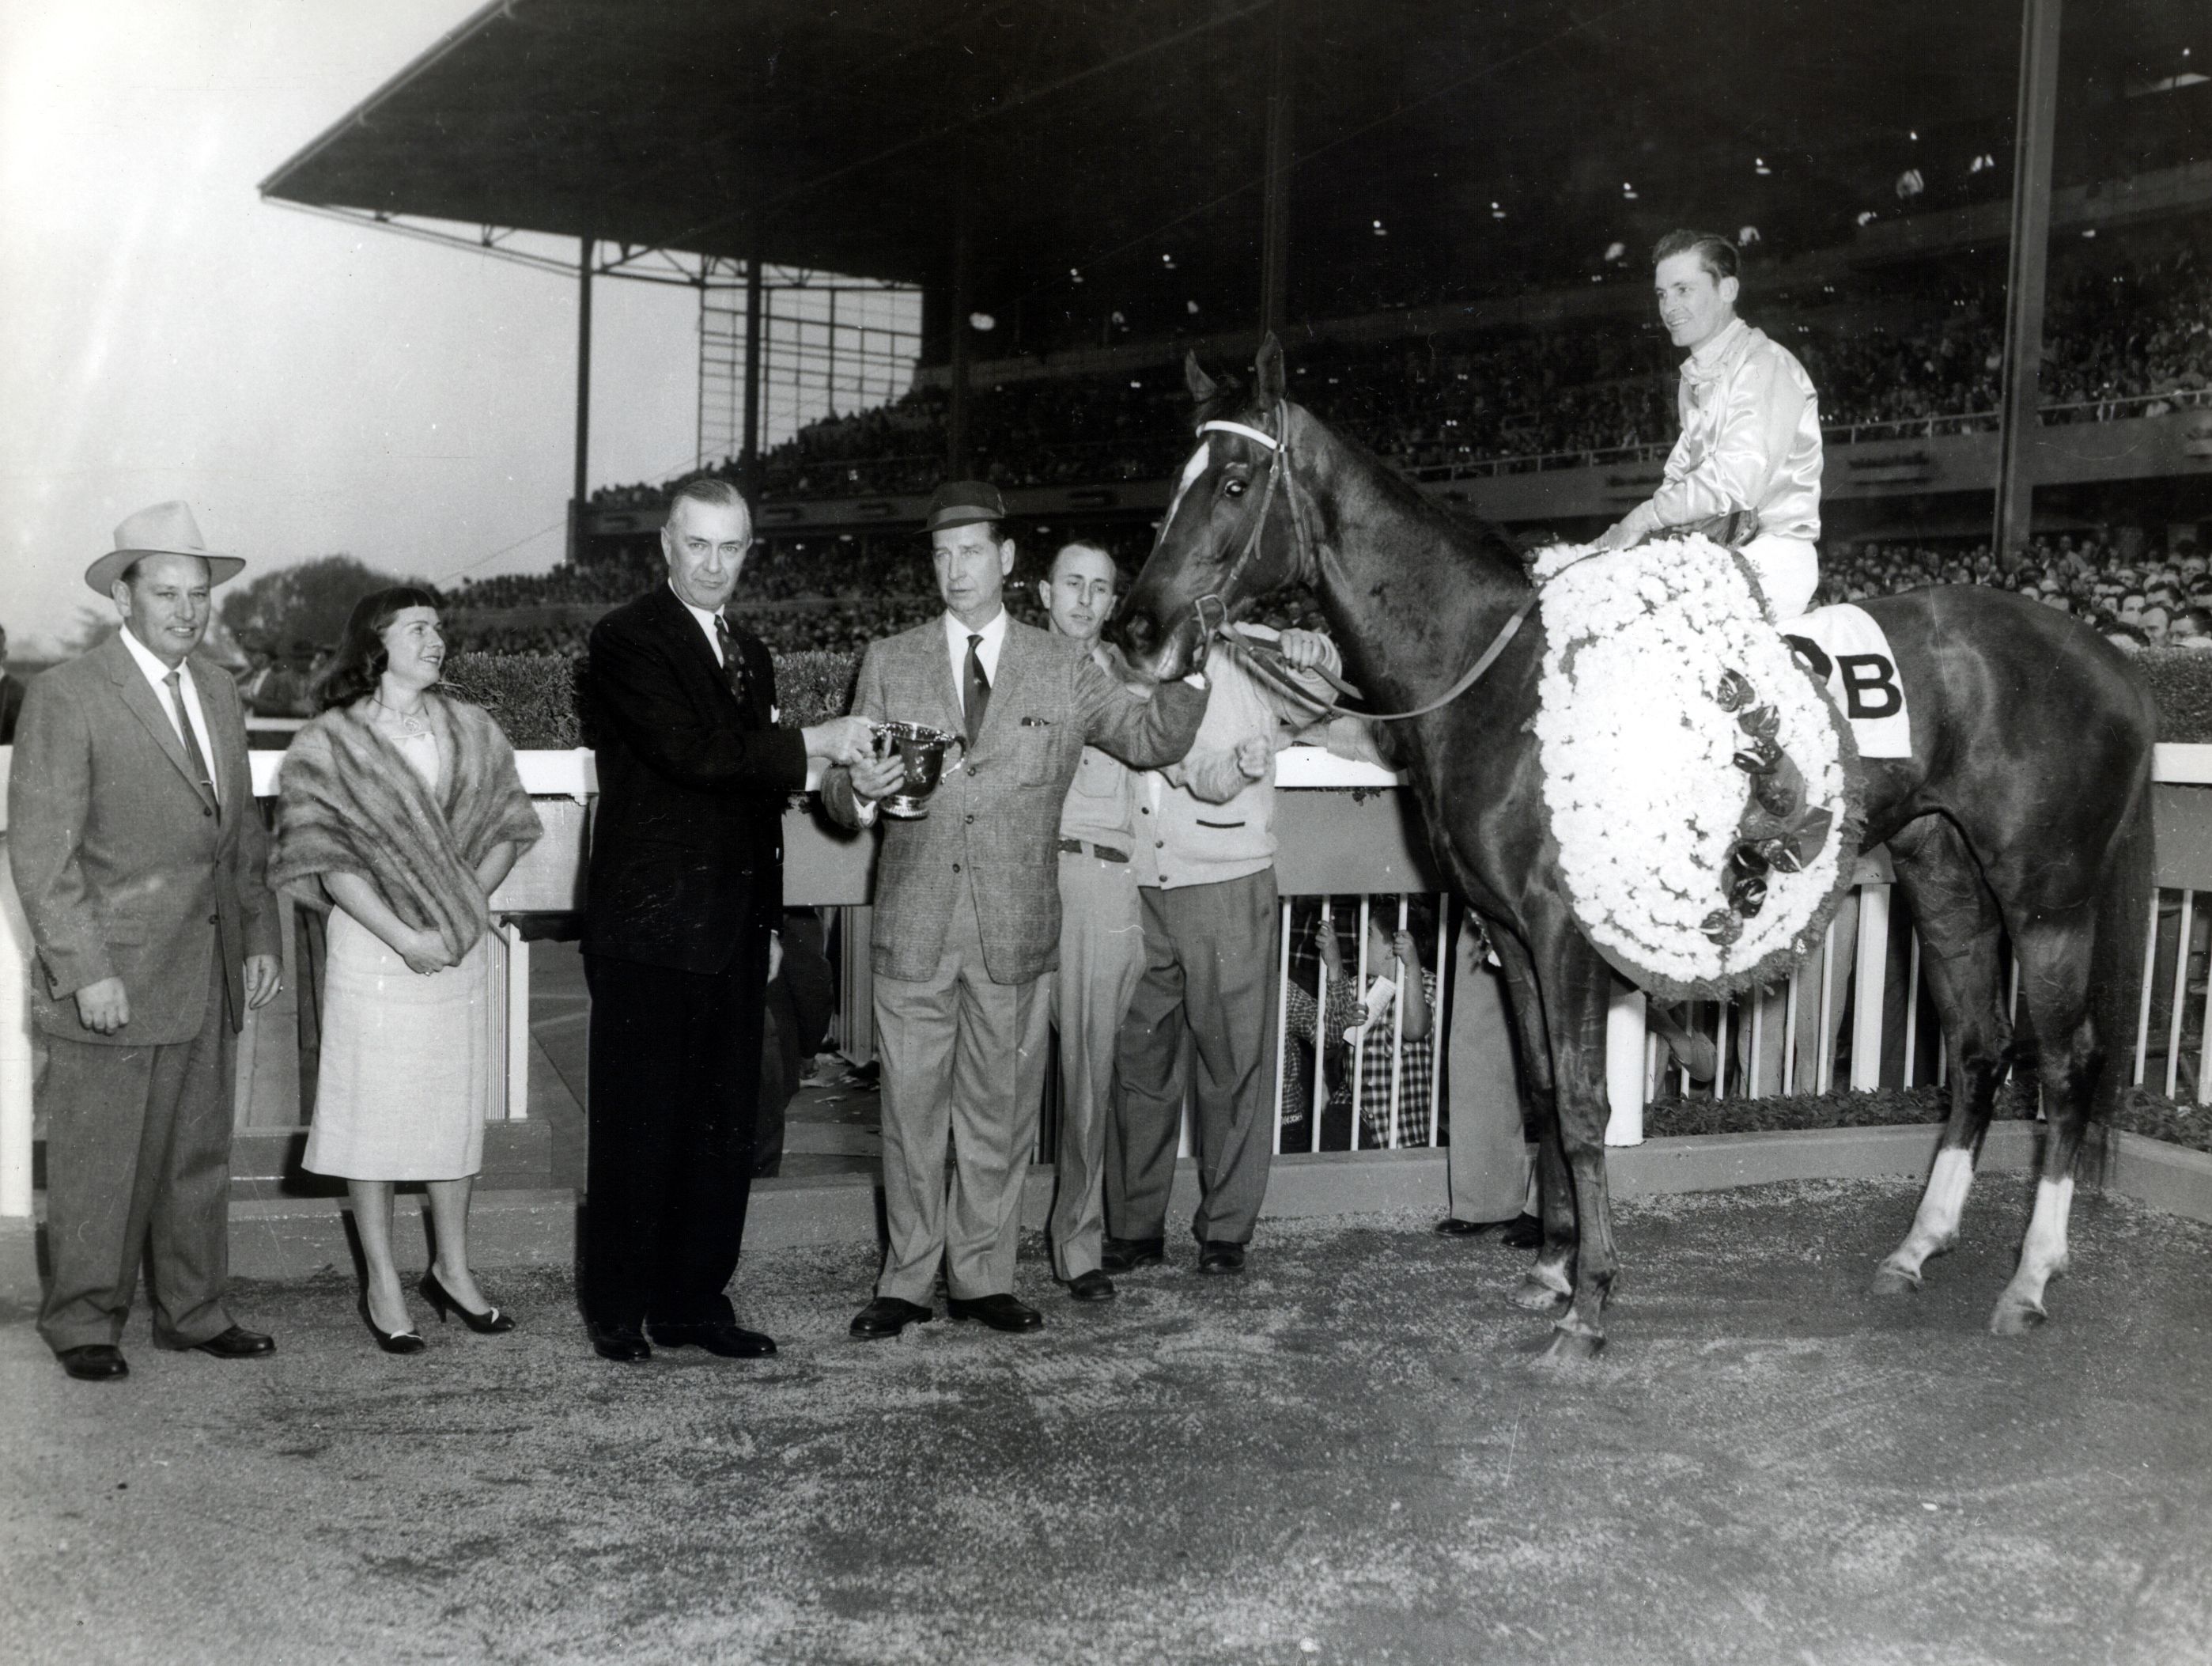 Silver Spoon (Raymond York up) in the winner's circle for the 1959 Santa Anita Derby (Museum Collection)